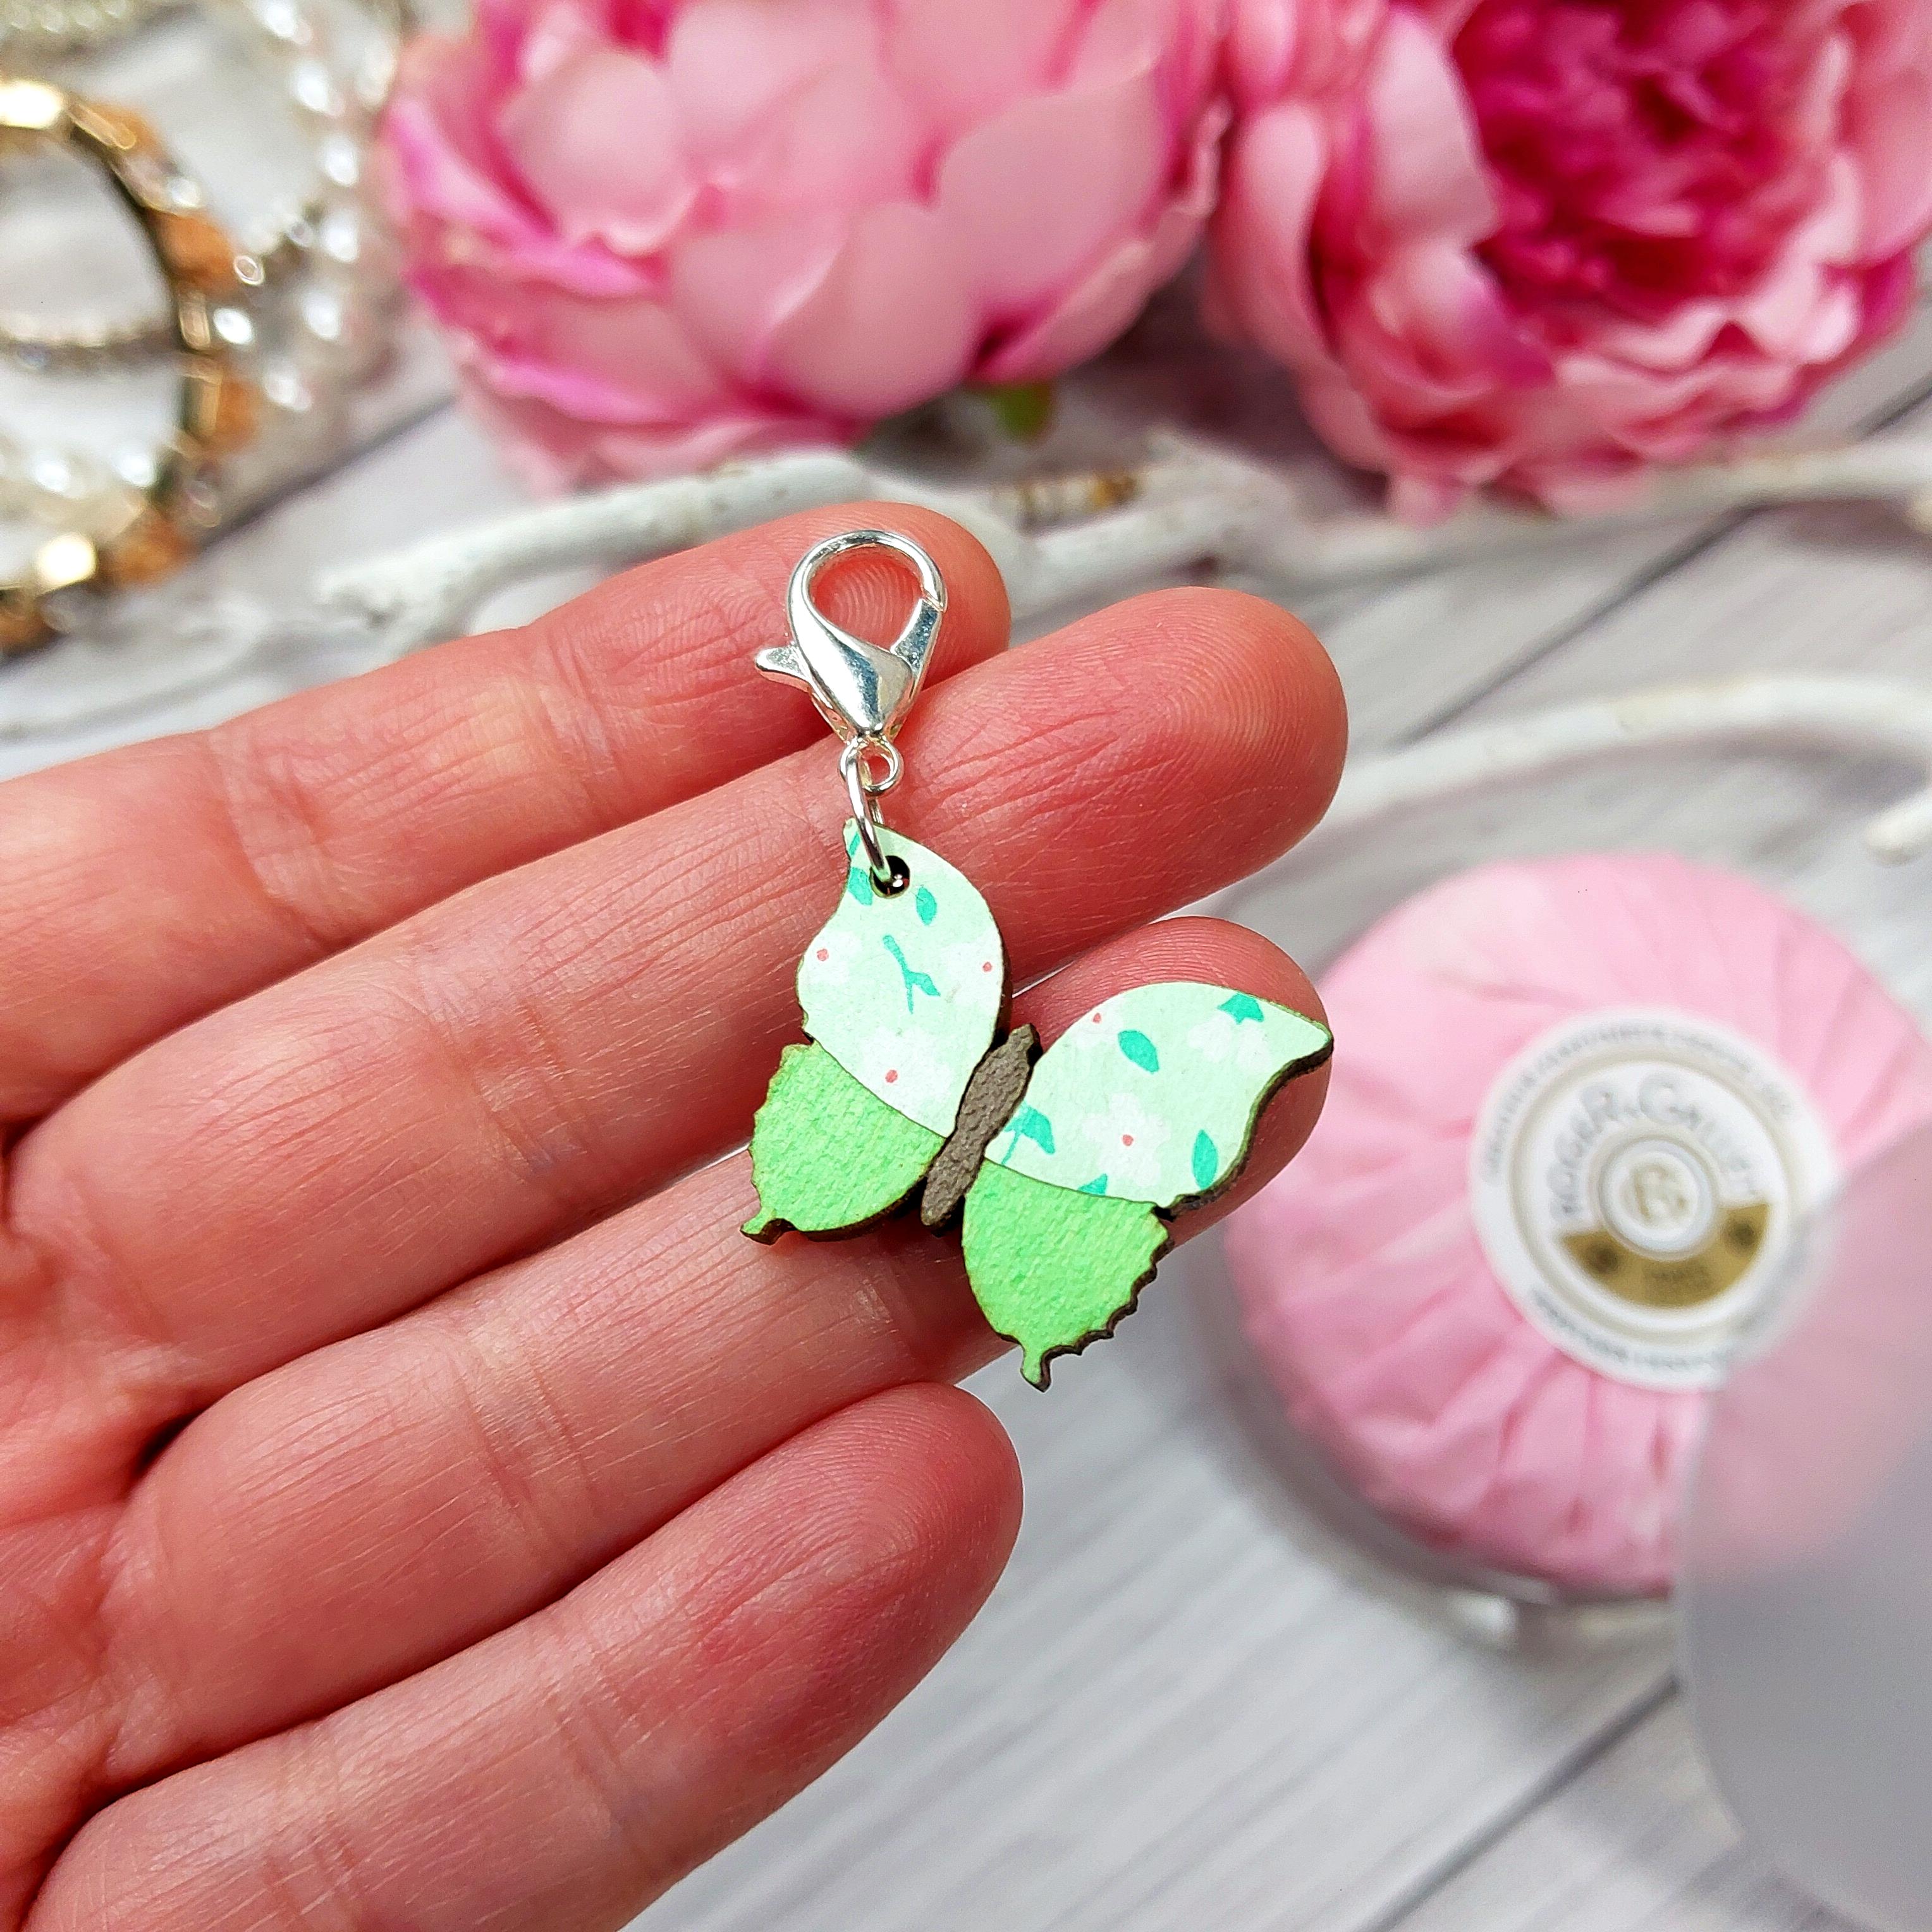 Hand holding green wooden stitch marker butterfly in front of pink flowers in the background